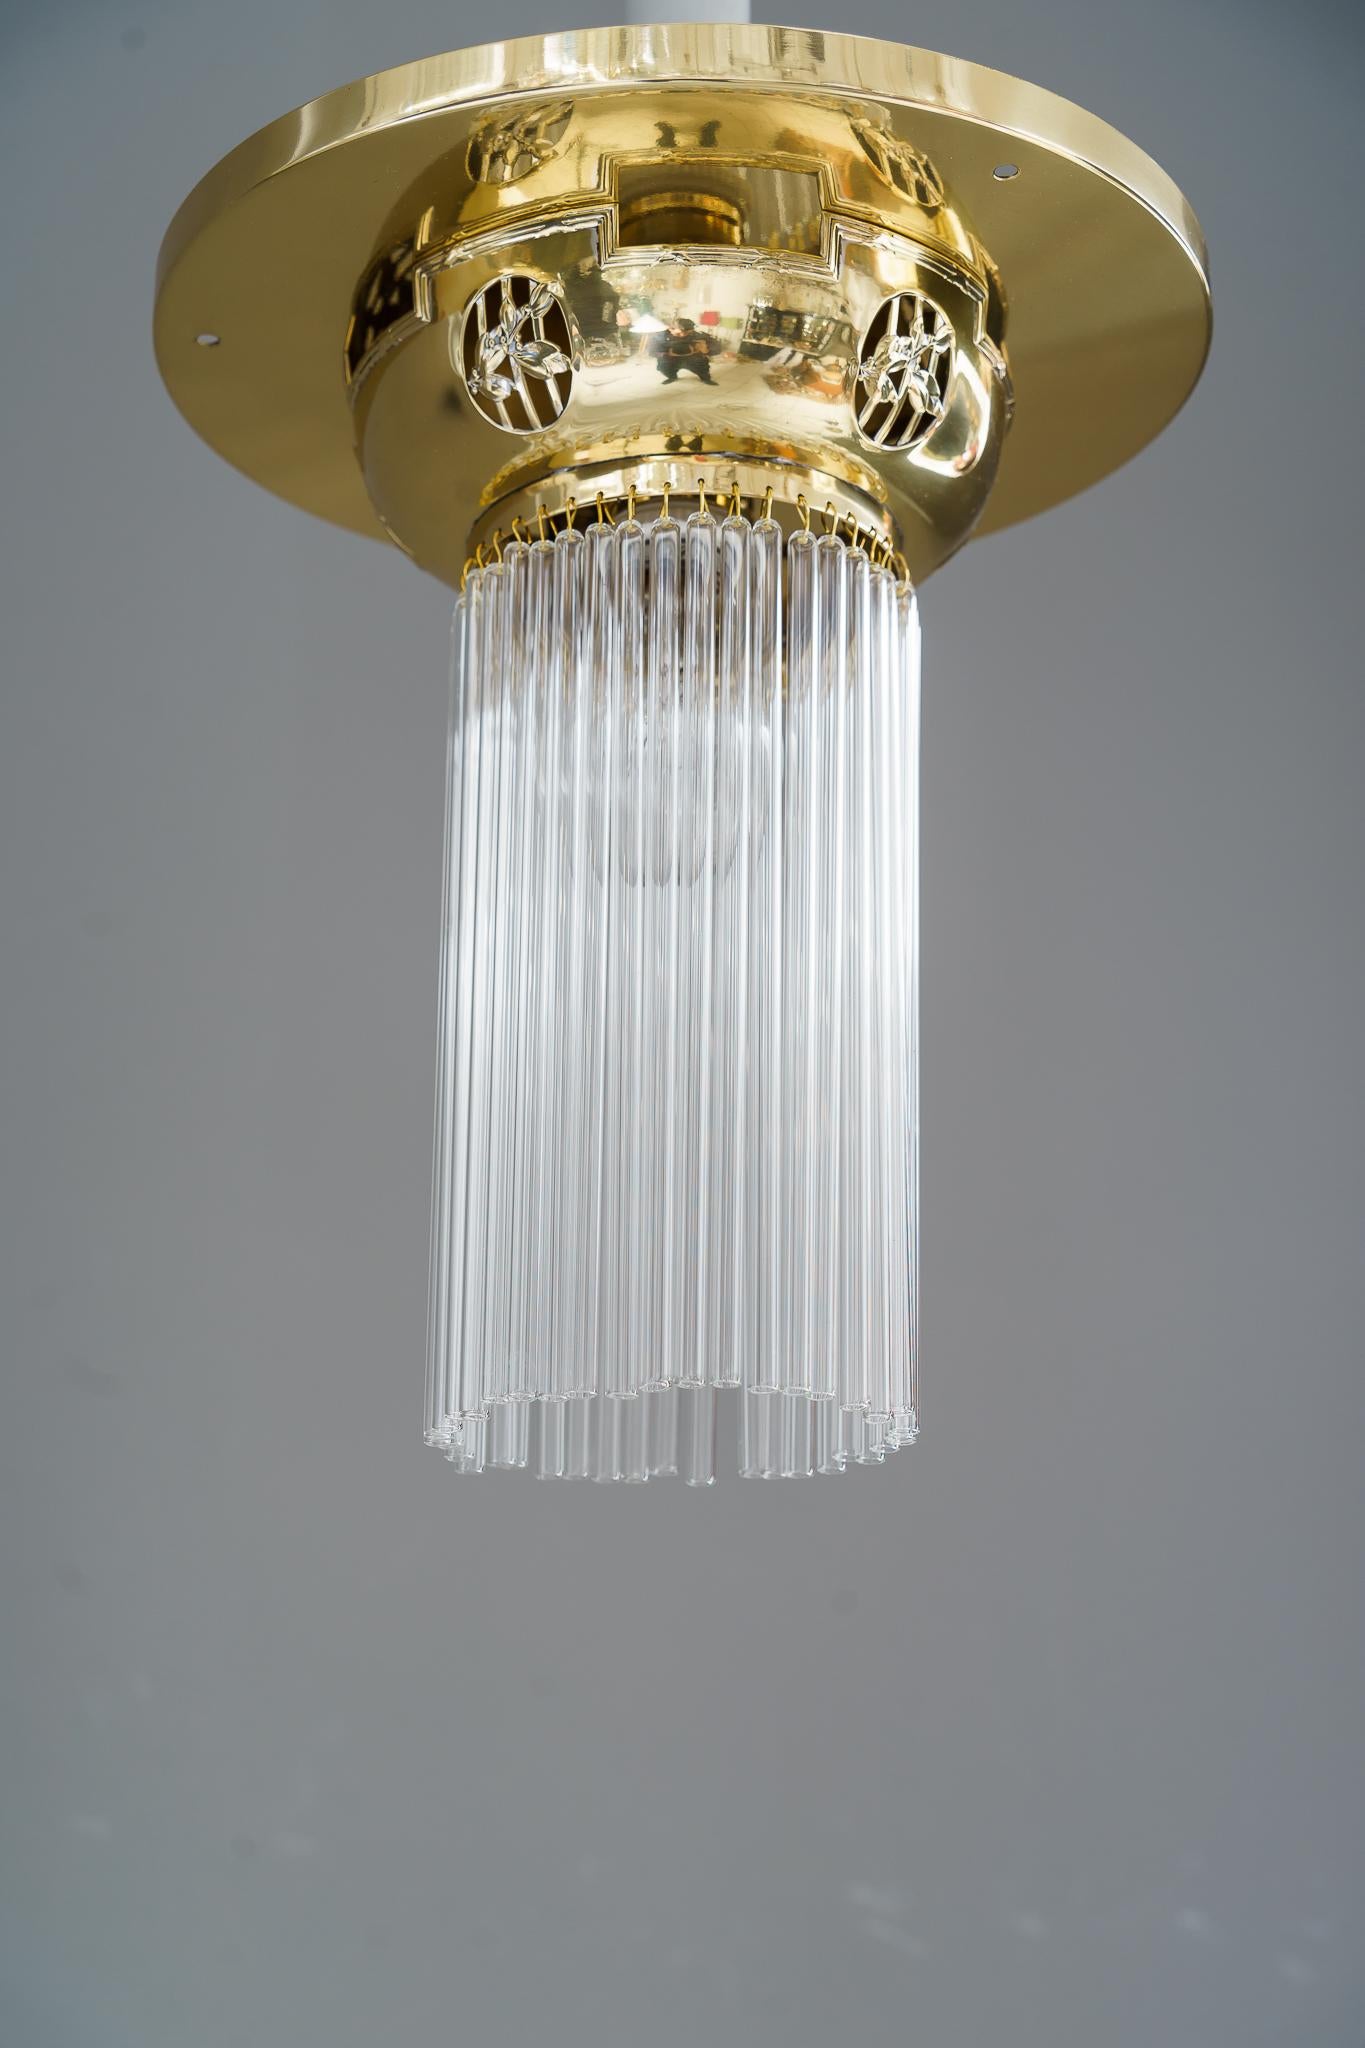 Art Deco ceiling lamp with glass sticks vienna around 1920s 
Brass polished and stove enameled
Glass sticks are replaced ( new ).